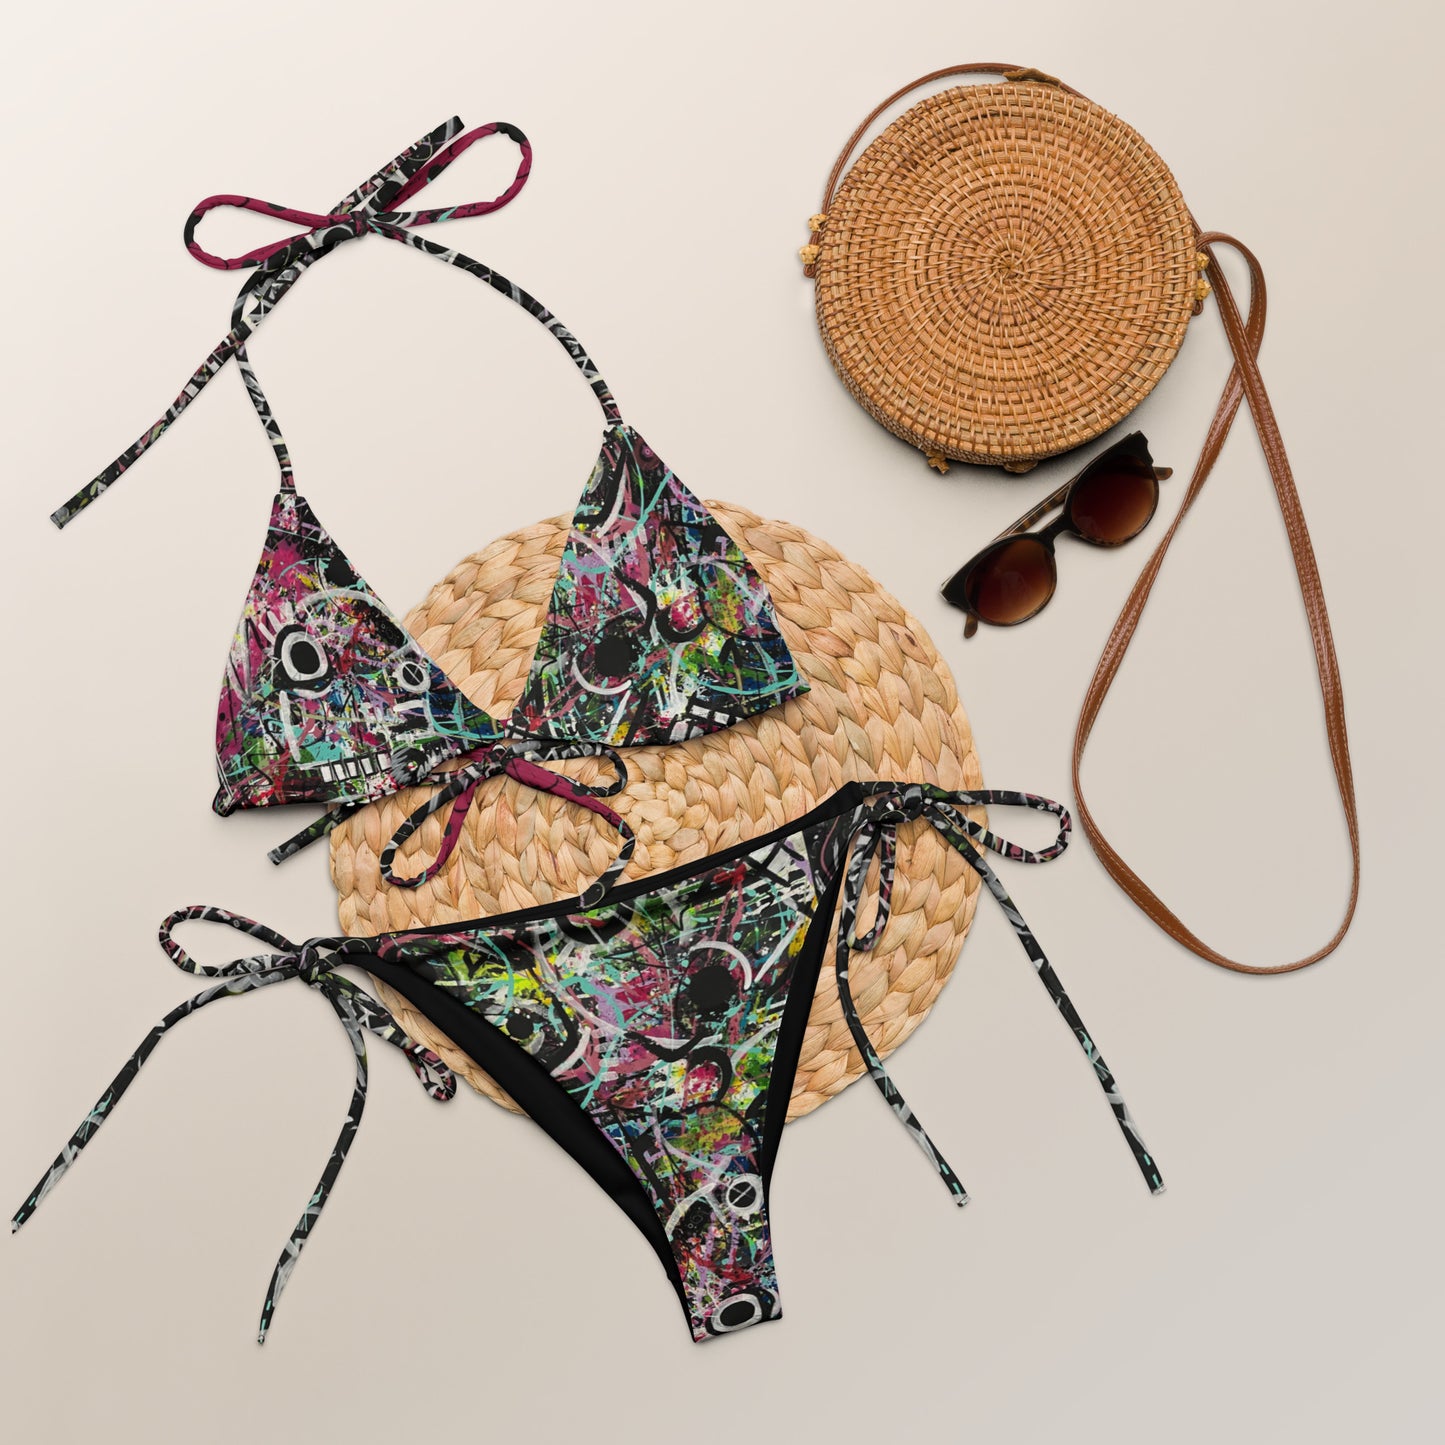 Crazy Paint All-over print recycled string bikini